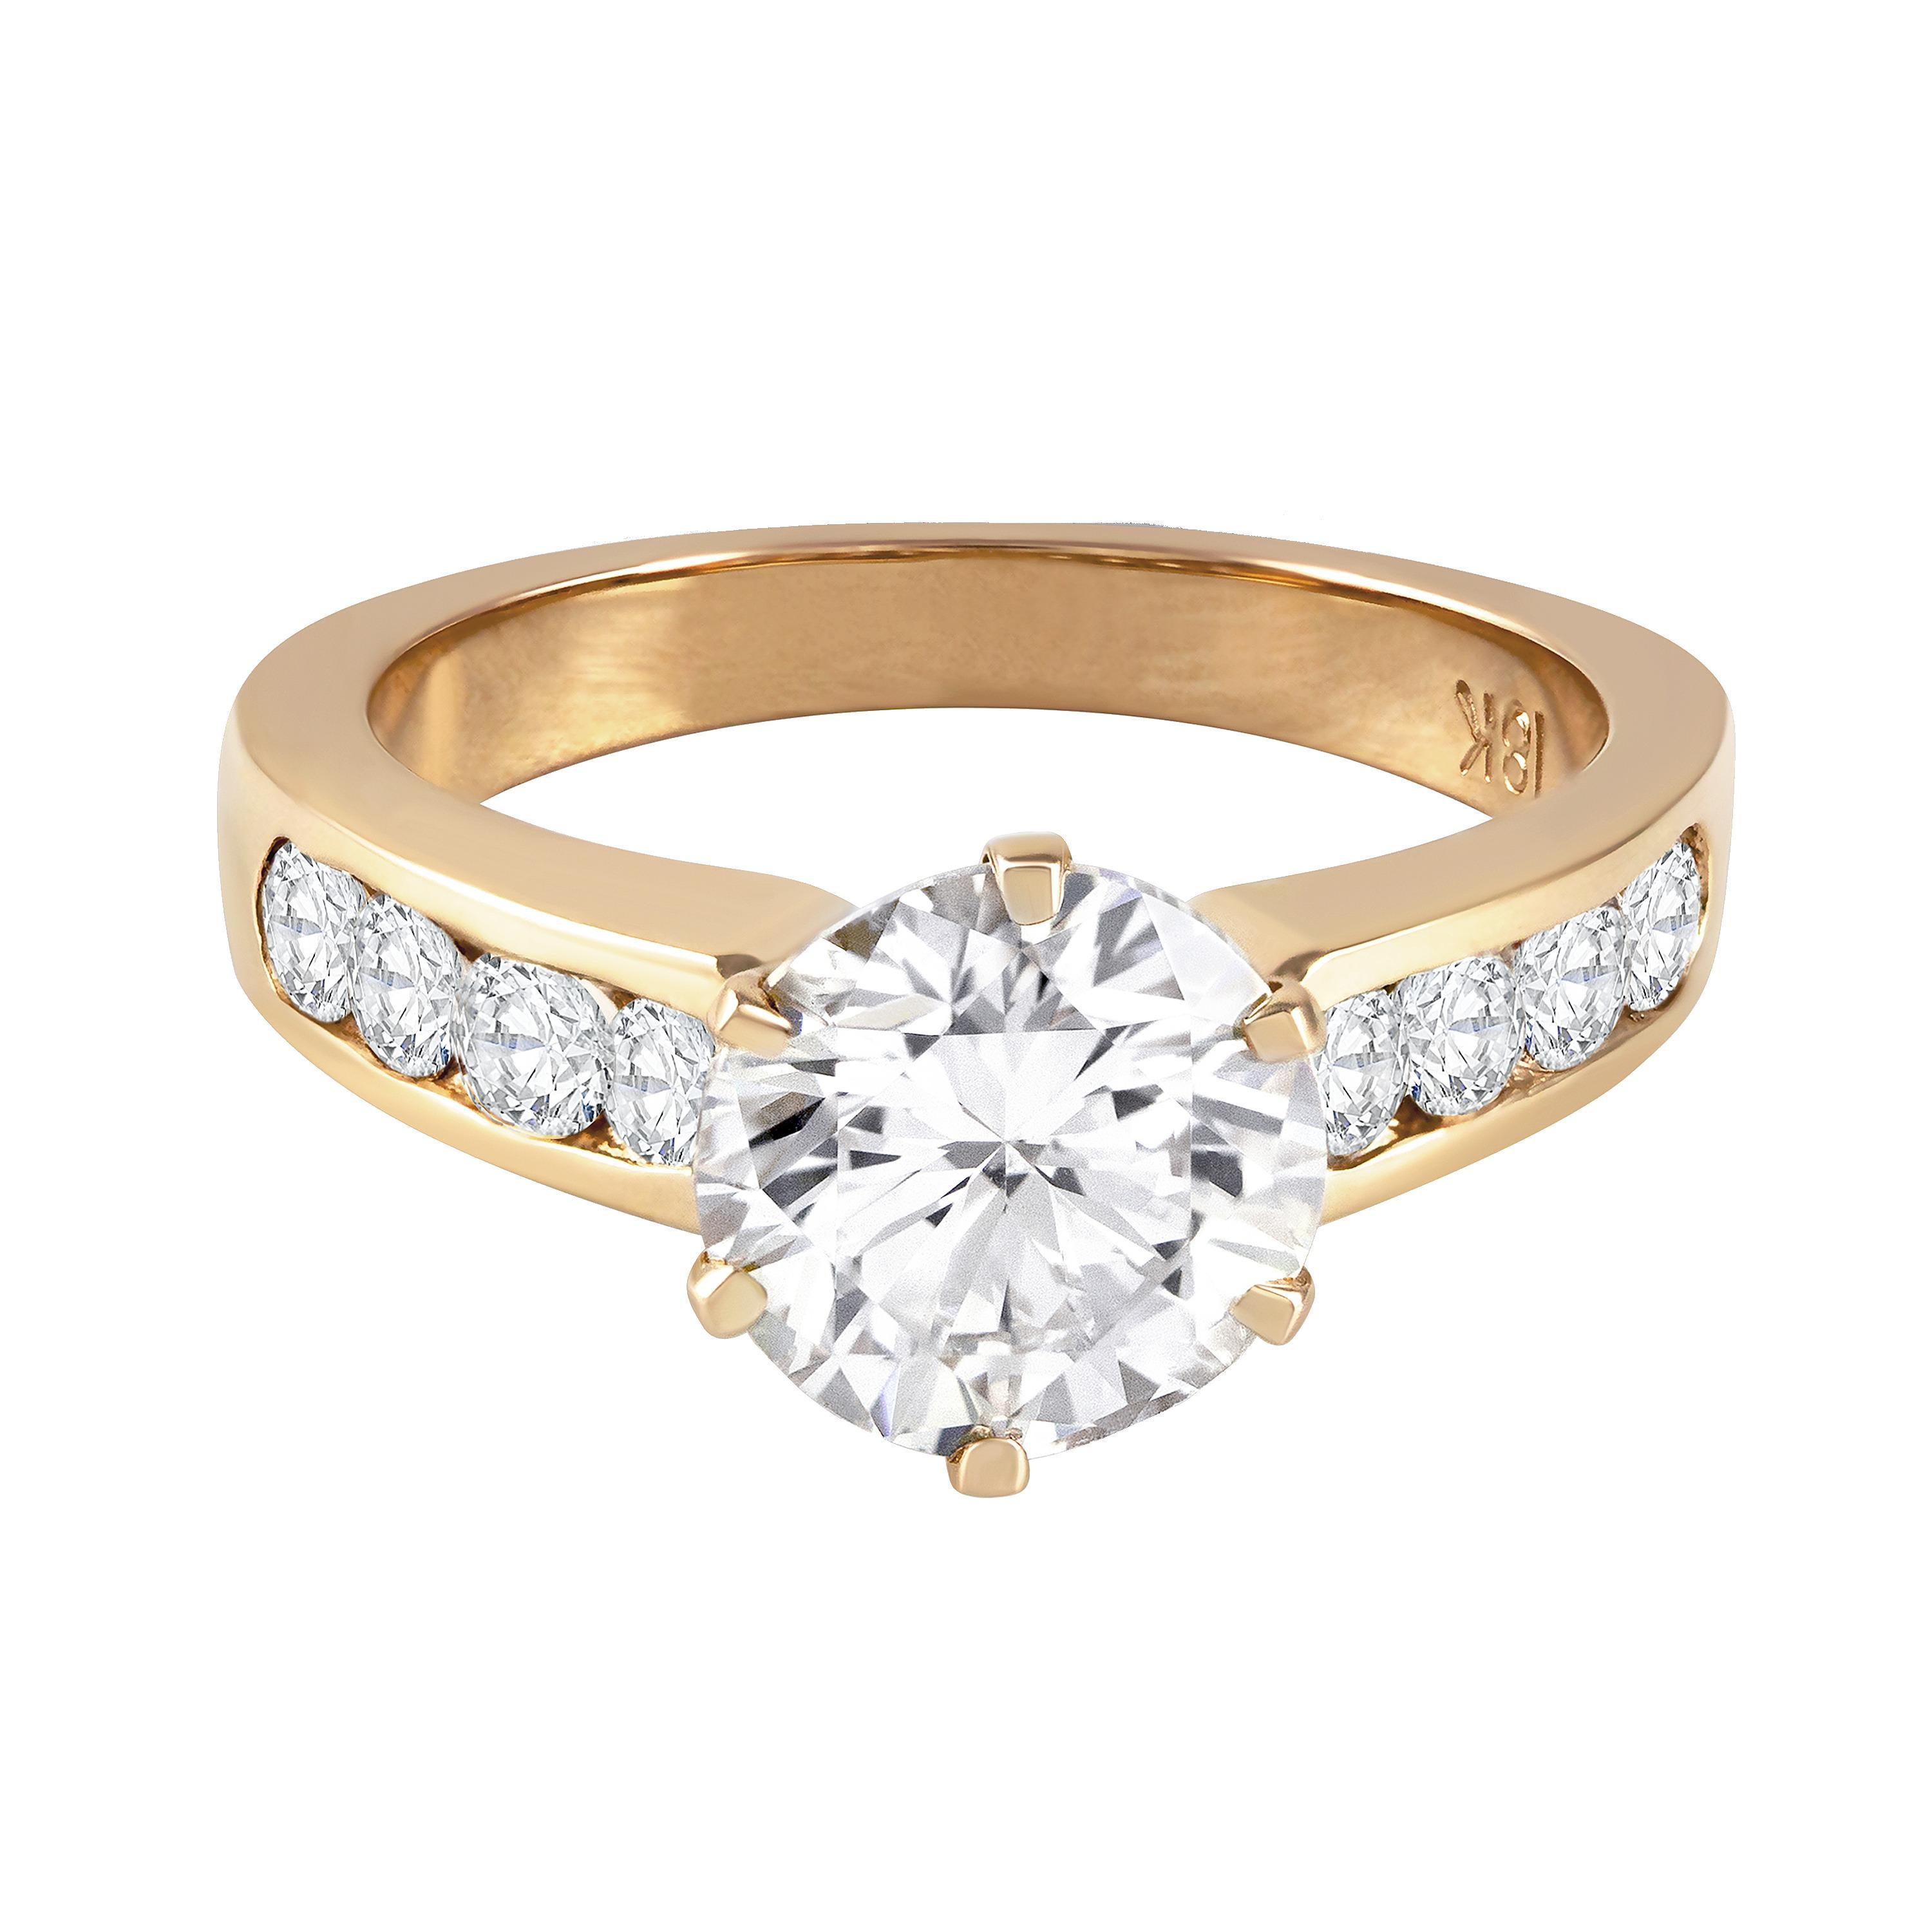 This style engagement ring is classic and timeless for a reason. Features a 2.15 carat brilliant round diamond center stone securely set in 6 prongs and accented by 0.50 carats of sparkling diamonds on either side of the ring. The accent diamonds